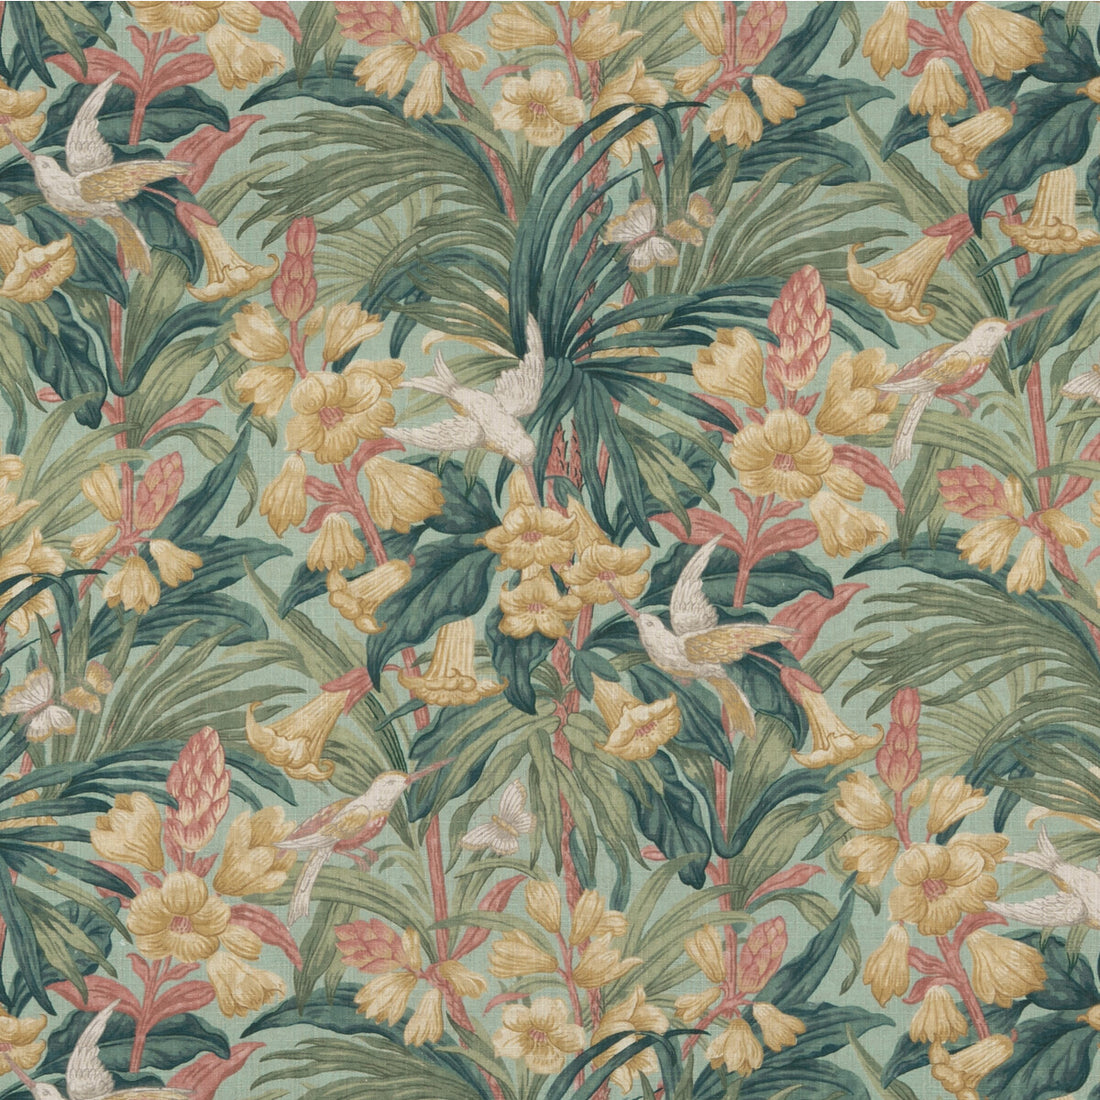 Trumpet Flowers fabric in teal color - pattern BP10982.1.0 - by G P &amp; J Baker in the Original Brantwood Fabric collection